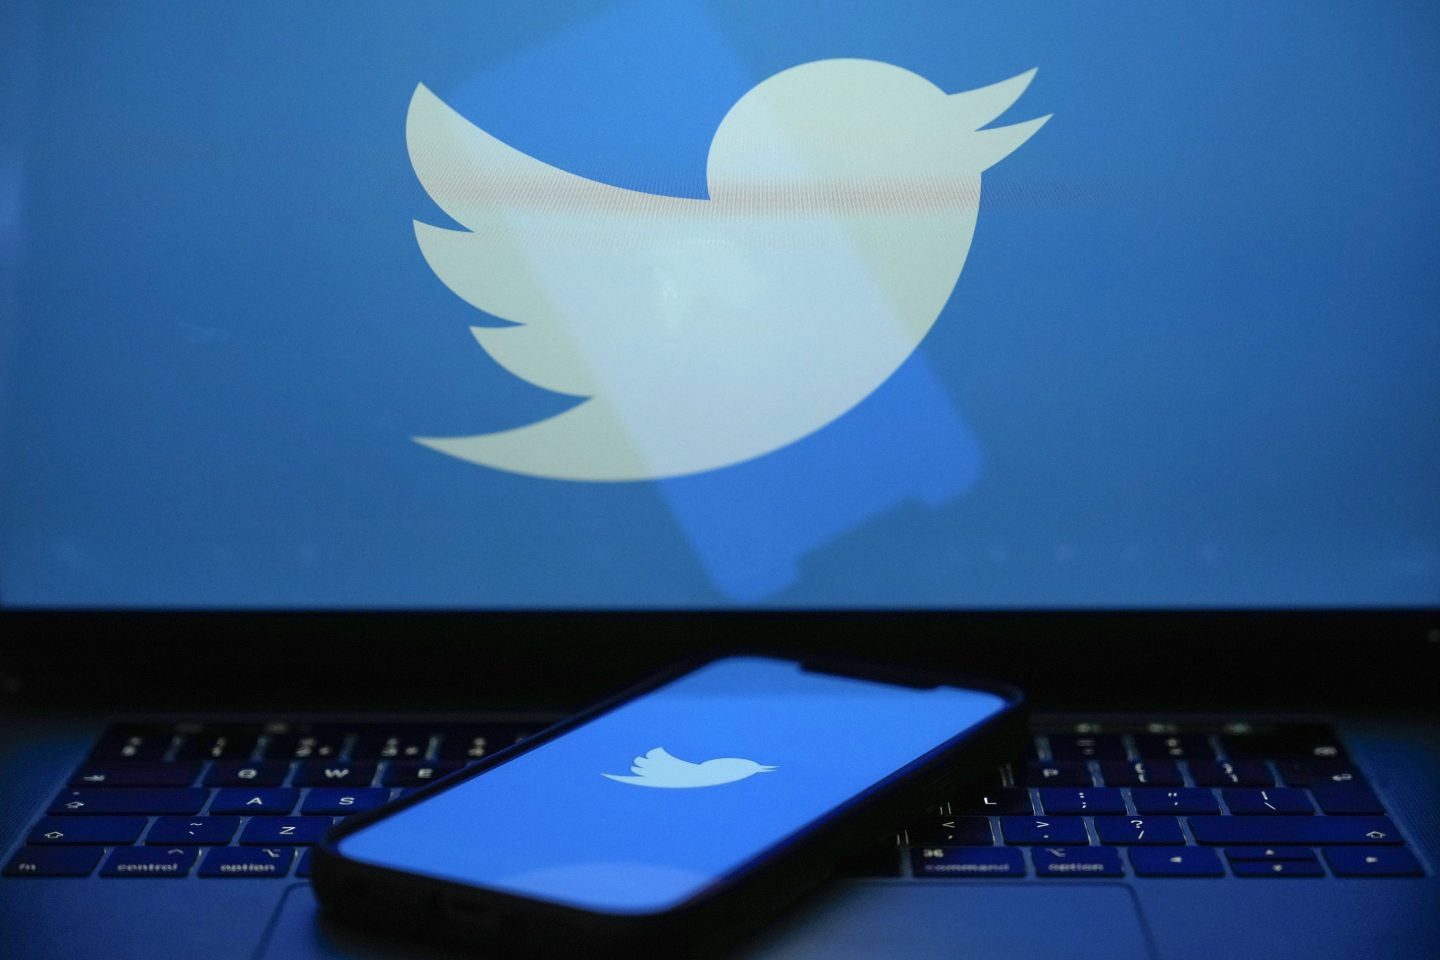 KNUTSFORD, UNITED KINGDOM APRIL 21: In this photo illustration the Twitter logo is seen on a computer screen and mobile cellphone on April 21, 2023 in Knutsford, United Kingdom. The social media company started removing large numbers of the blue verification check marks, or &#8220;blue ticks,&#8221; that had historically indicated a verified account. The company said in a statement that they are &#8220;removing legacy verified checkmarks&#8221; and, to remain verified on Twitter, users can sign up for the paid Twitter Blue subscription. (Photo illustration by Christopher Furlong/Getty Images)